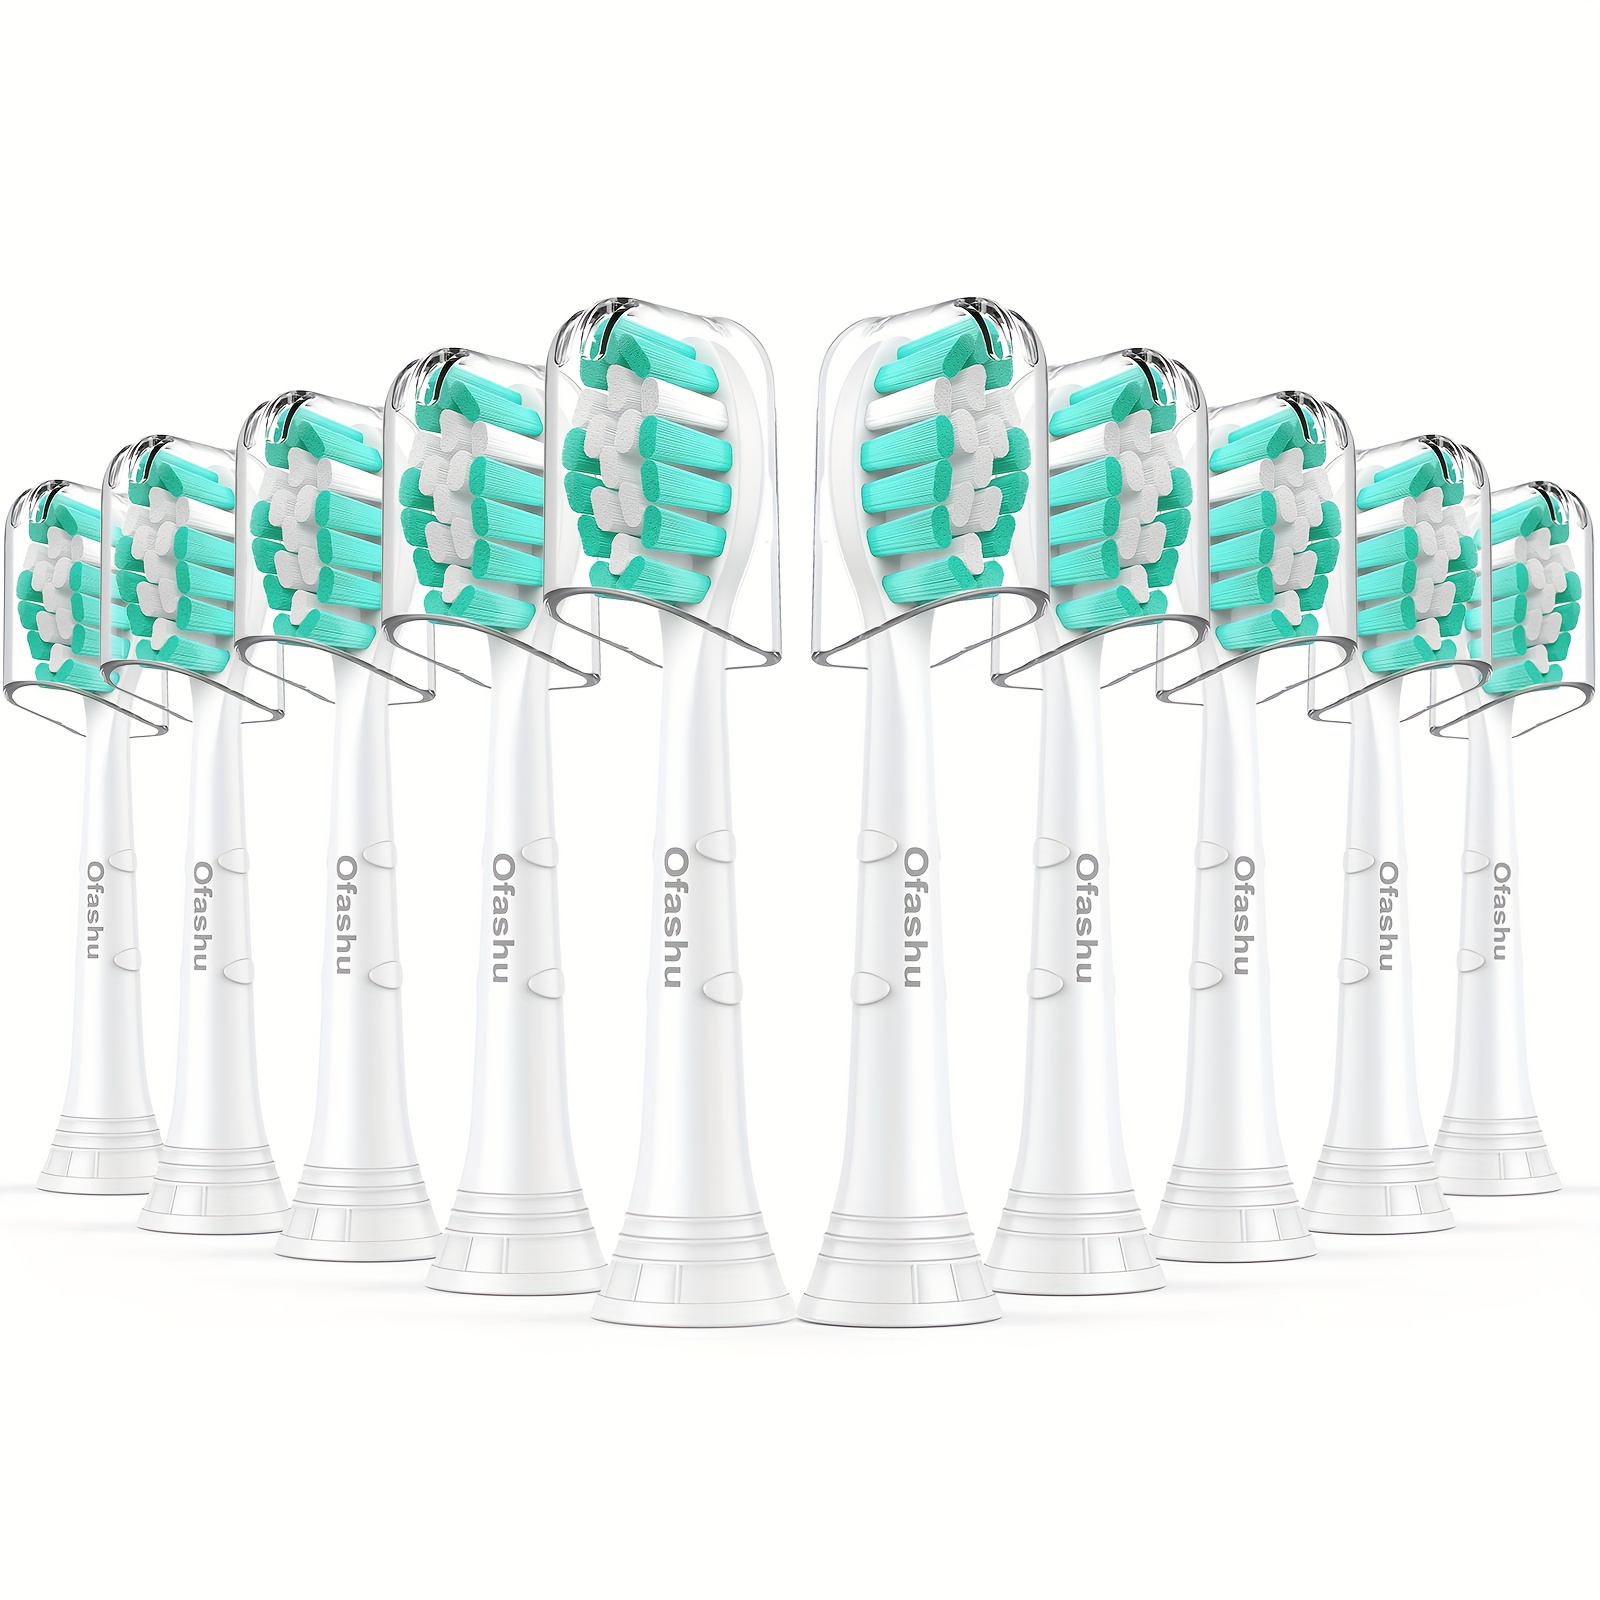 

10pcs Replacement Toothbrush Heads, Suitable For Sonicare, Professional Electric Toothbrush Heads, Brush Heads Suitable For Sonicare Replacement Heads